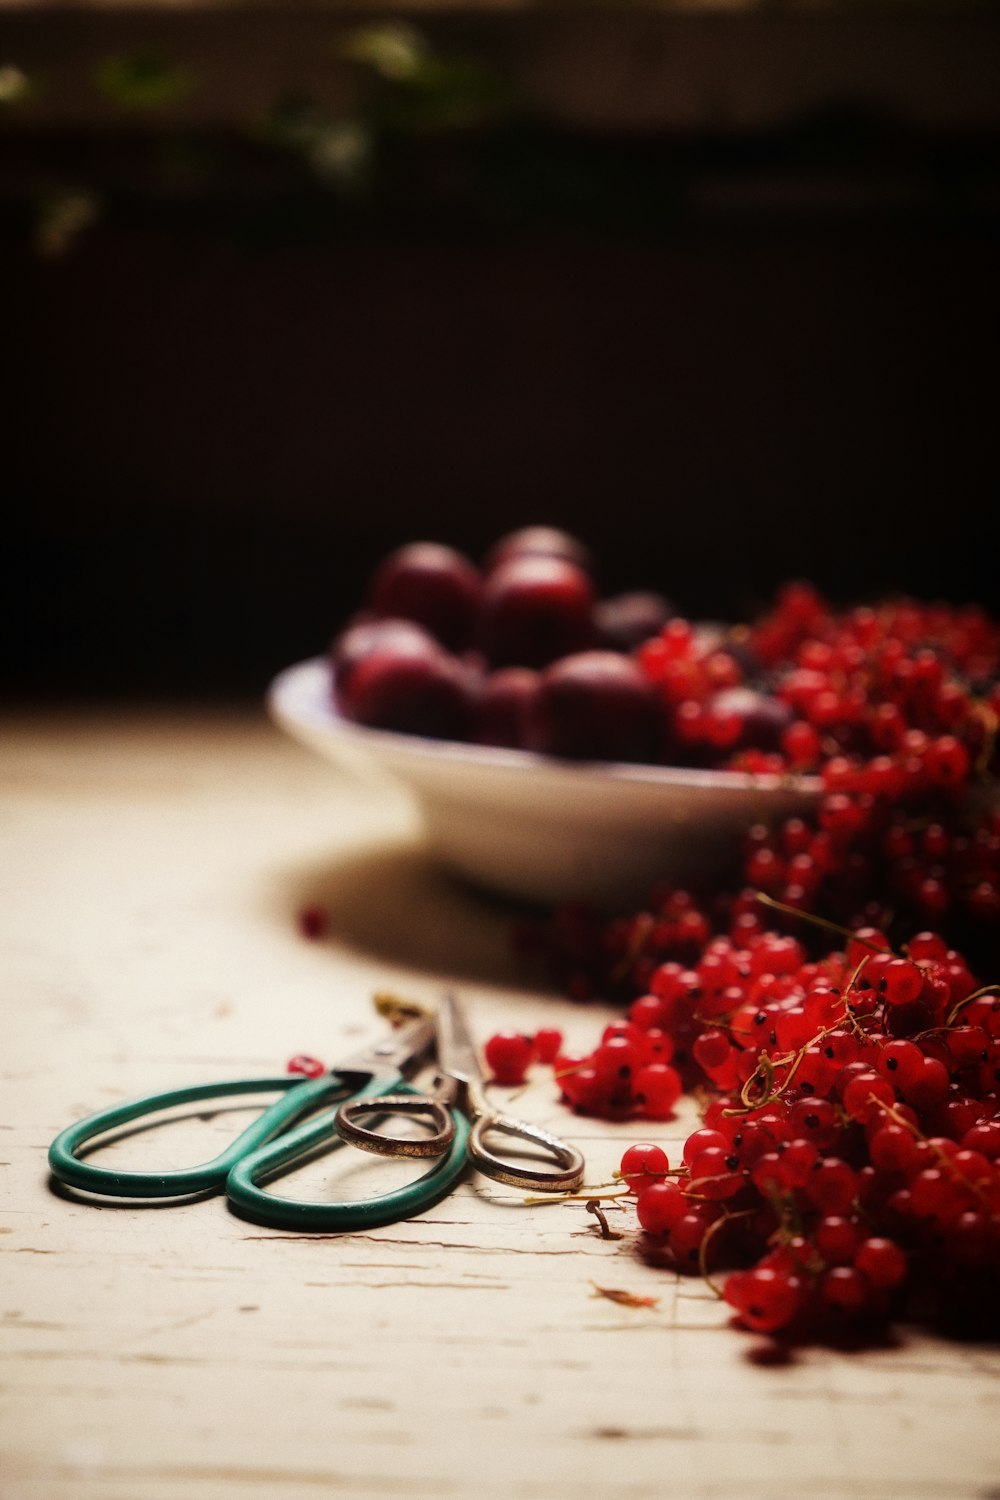 a bowl of cherries and a pair of scissors on a table